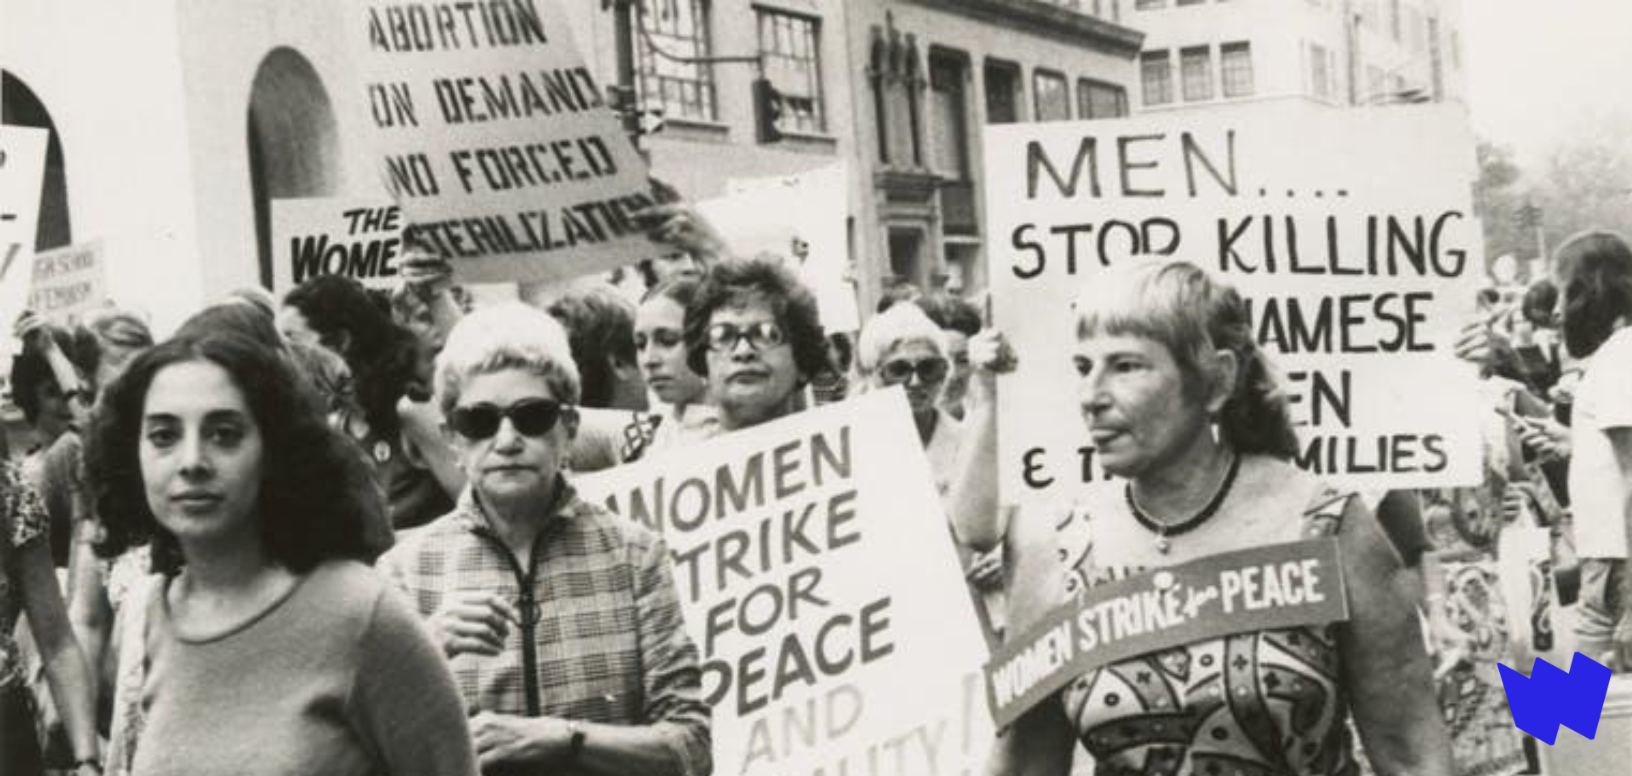 Women participate in the "March for Equality" in the 1970s.